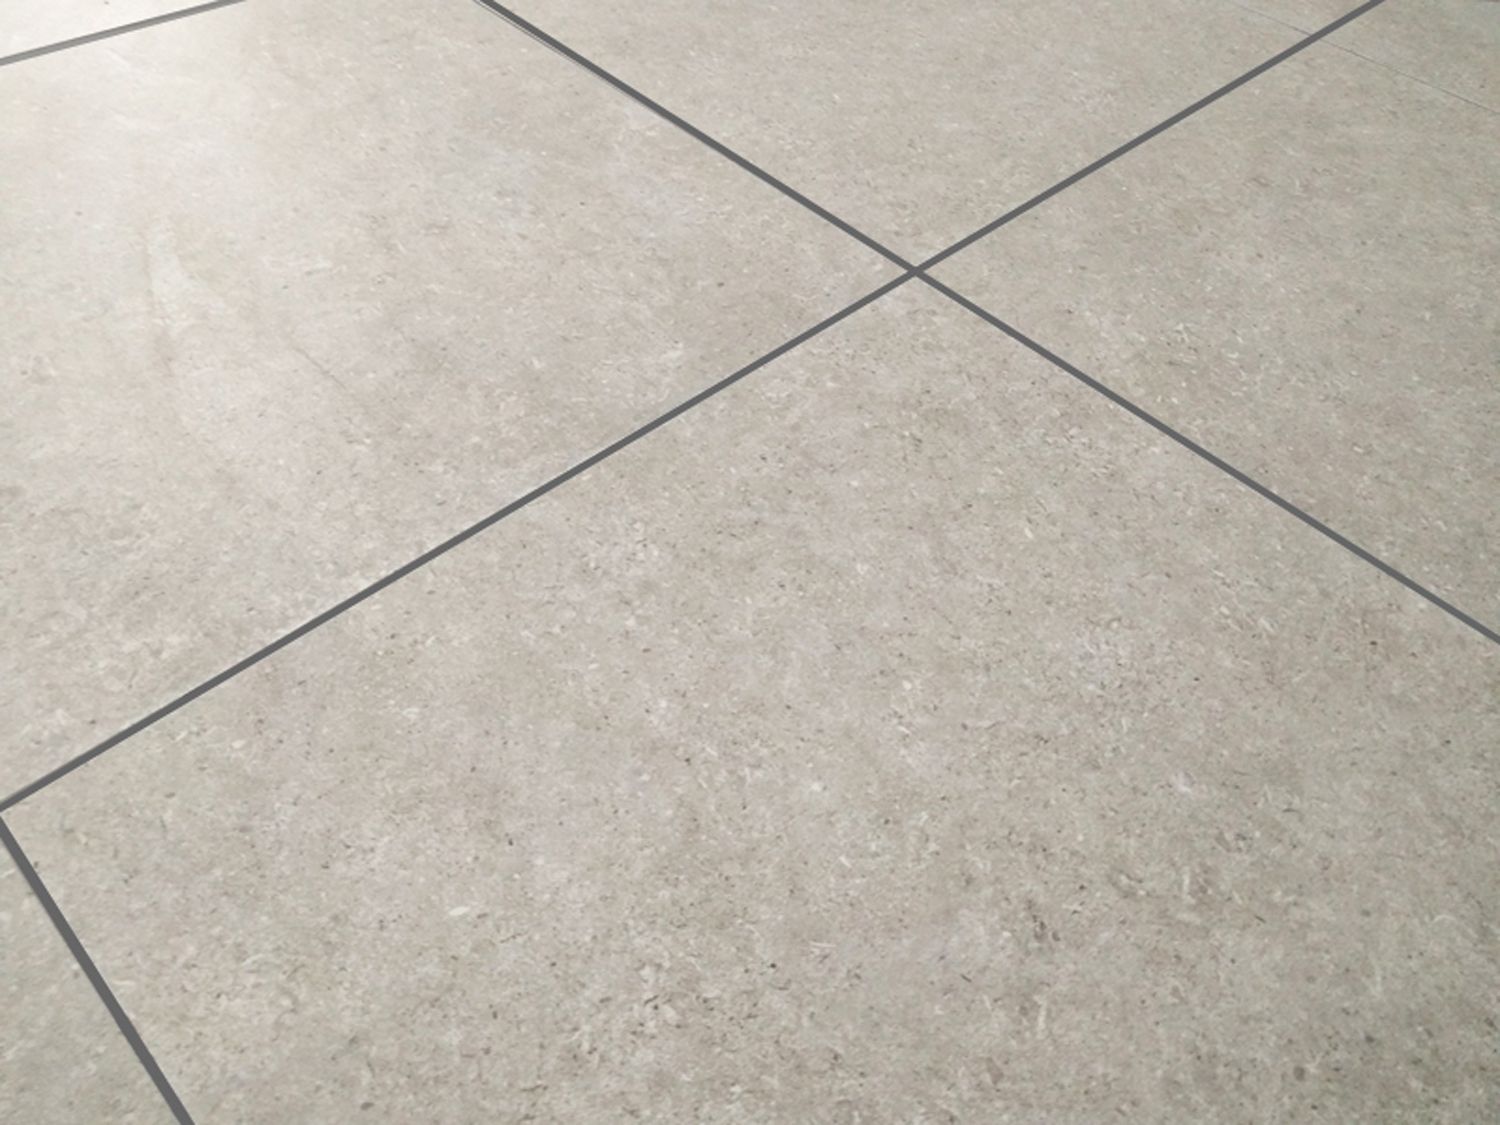 Reliable Companies To Consider When Looking To Buy Tiles